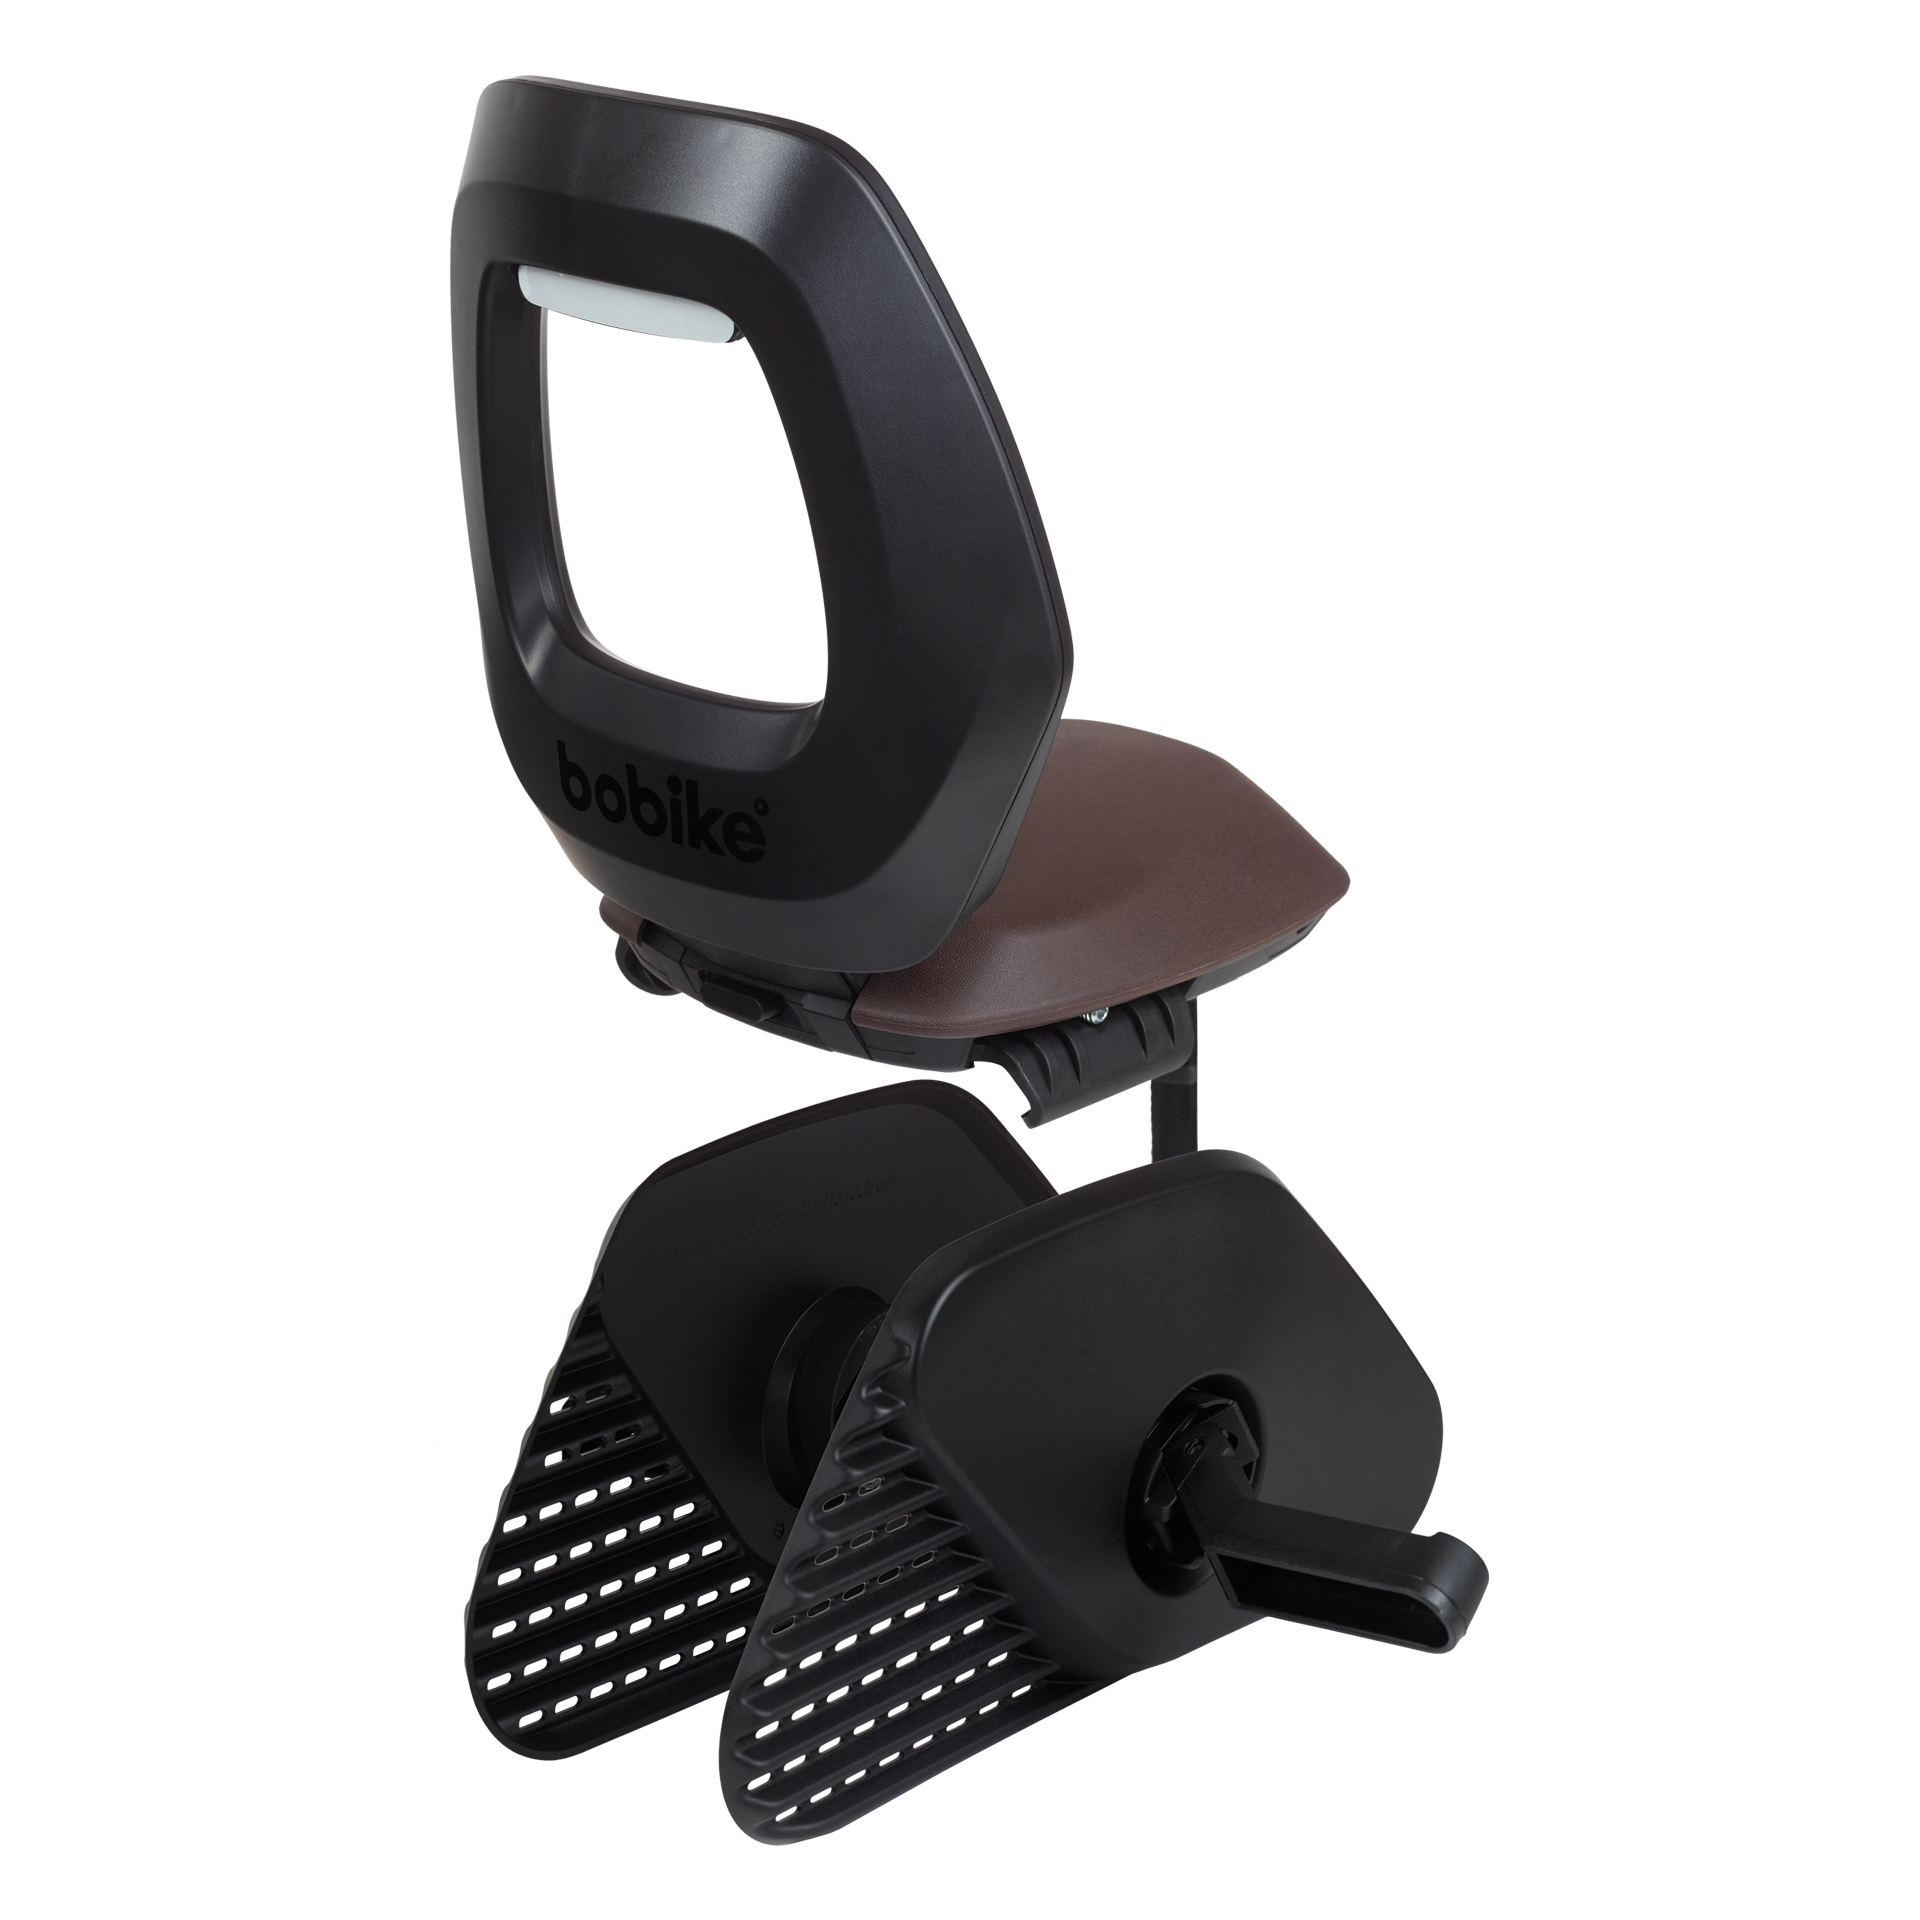 one junior rear bicycle seat for children up to 35kg and above 110cm